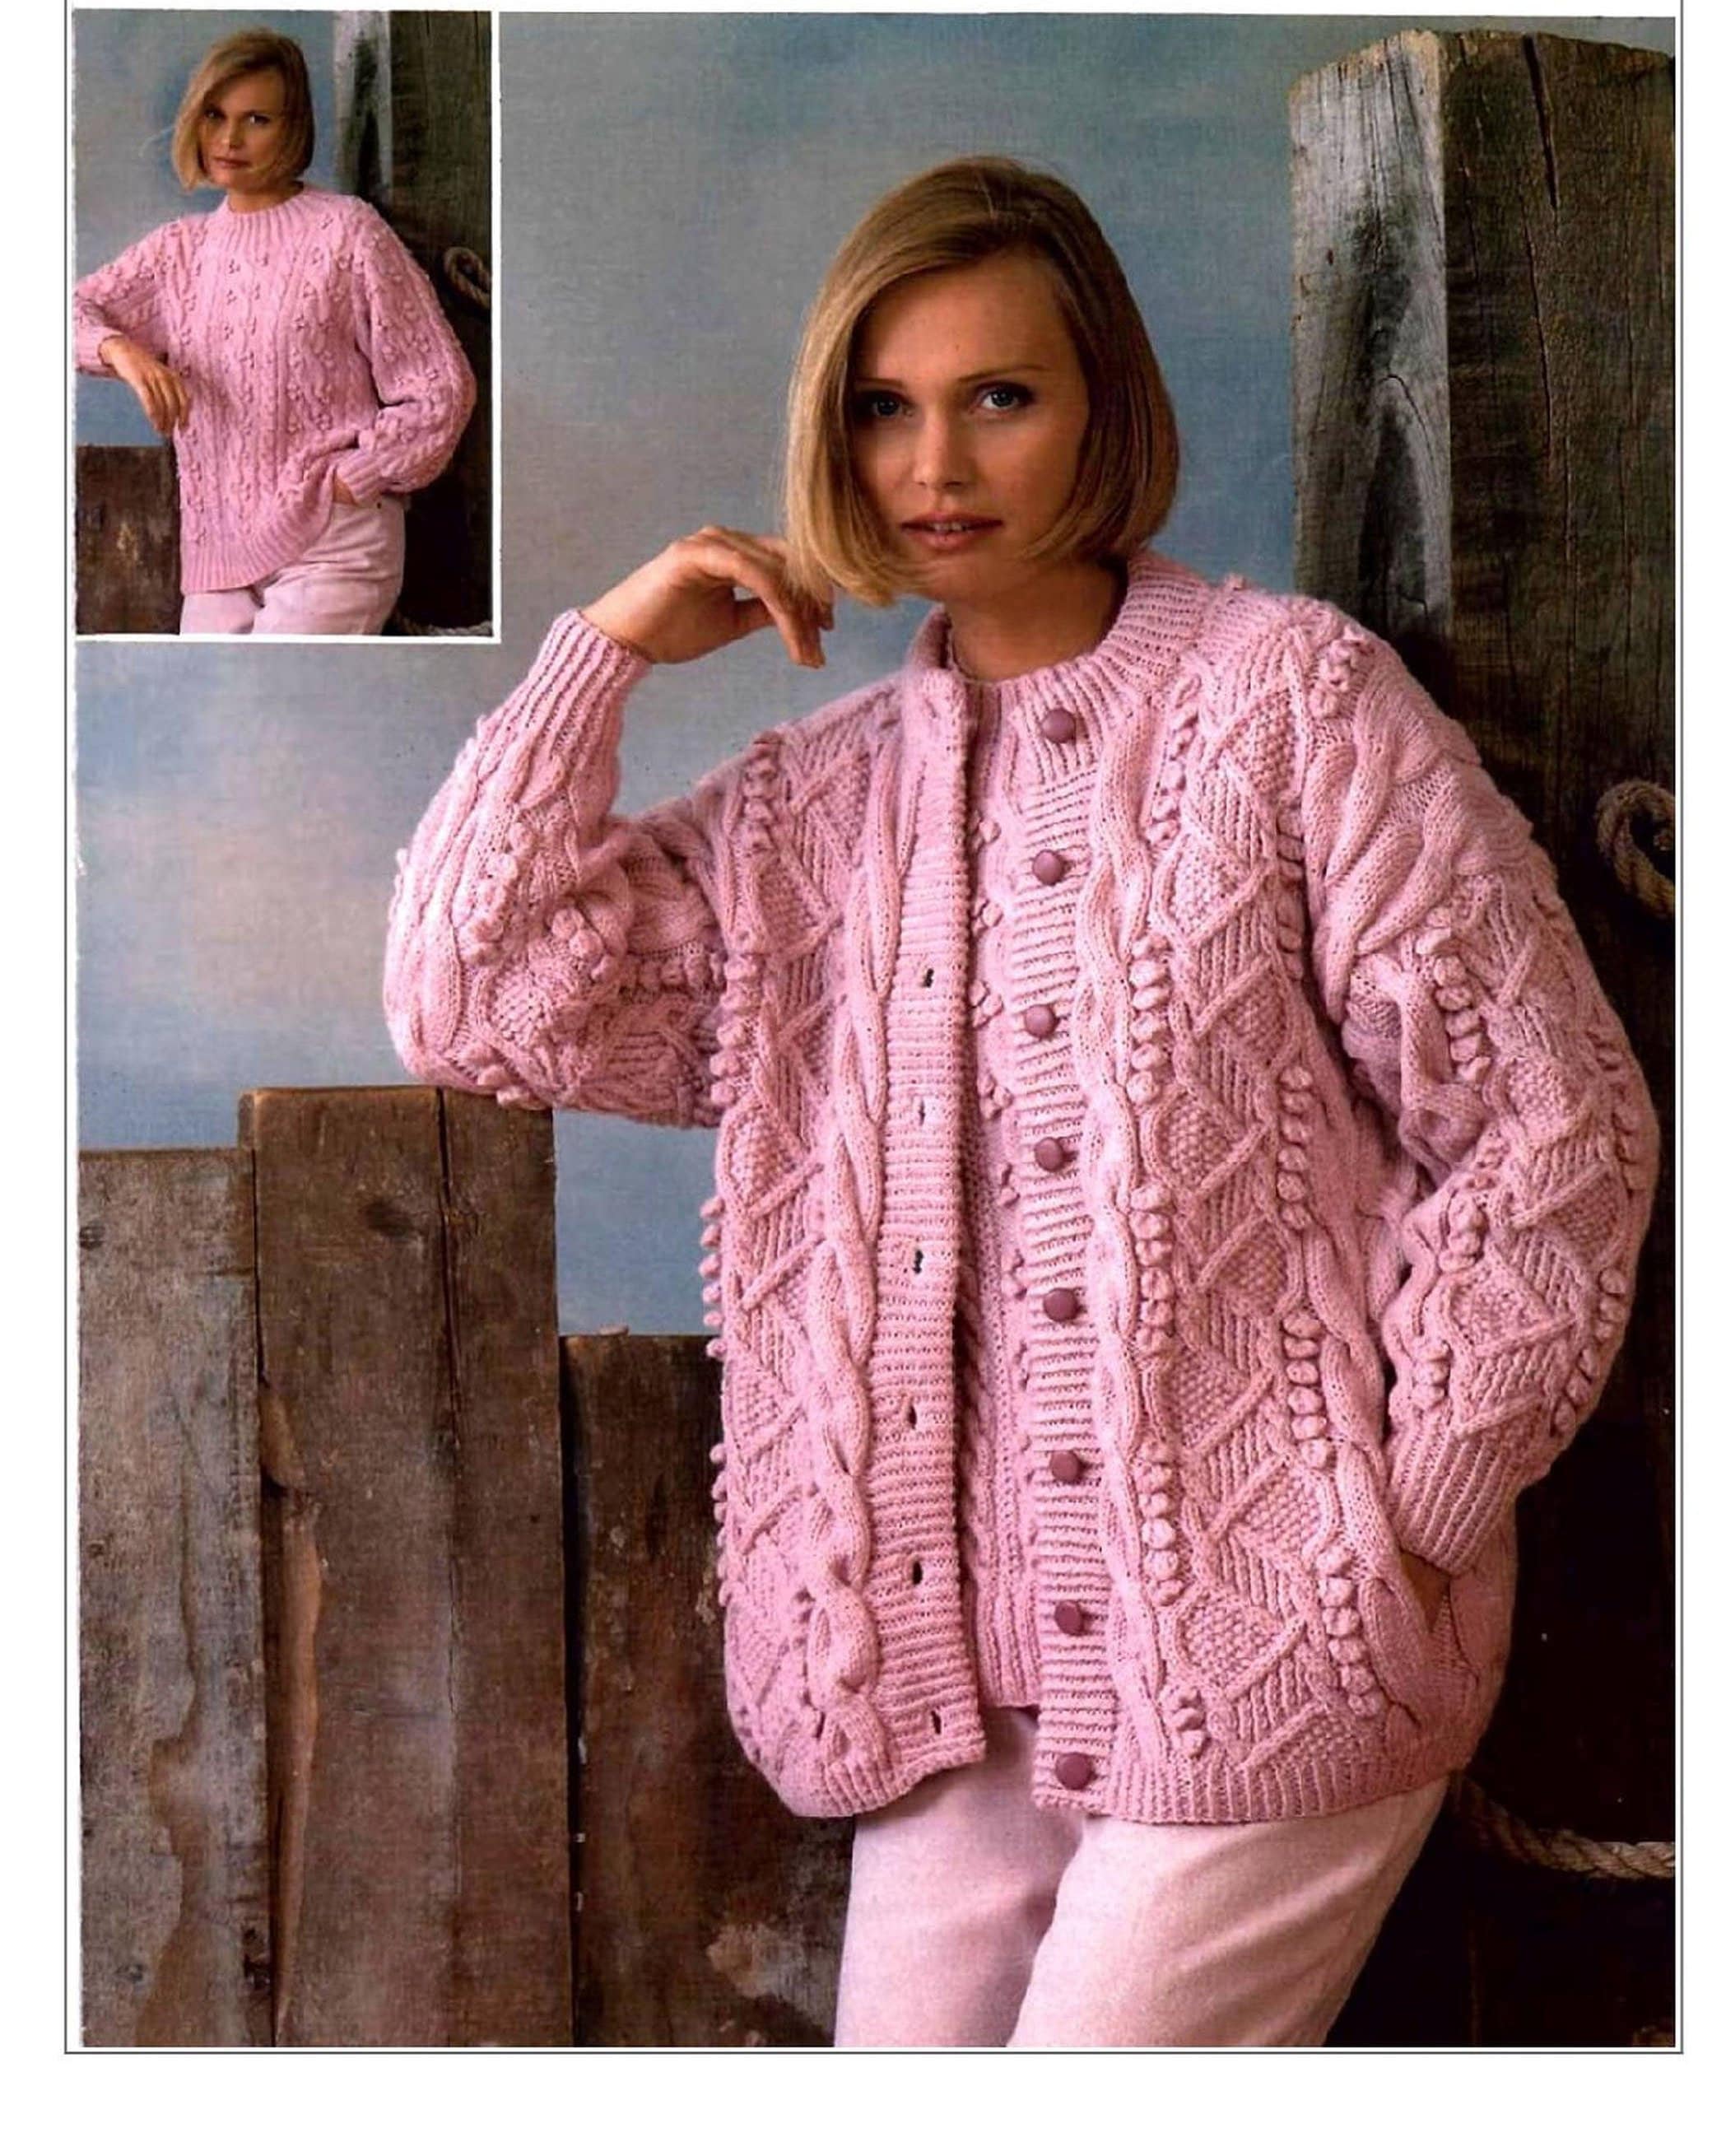 Lady's Jacket with Hood and Sweater Knitting Pattern in DK 32-42" mens 985 